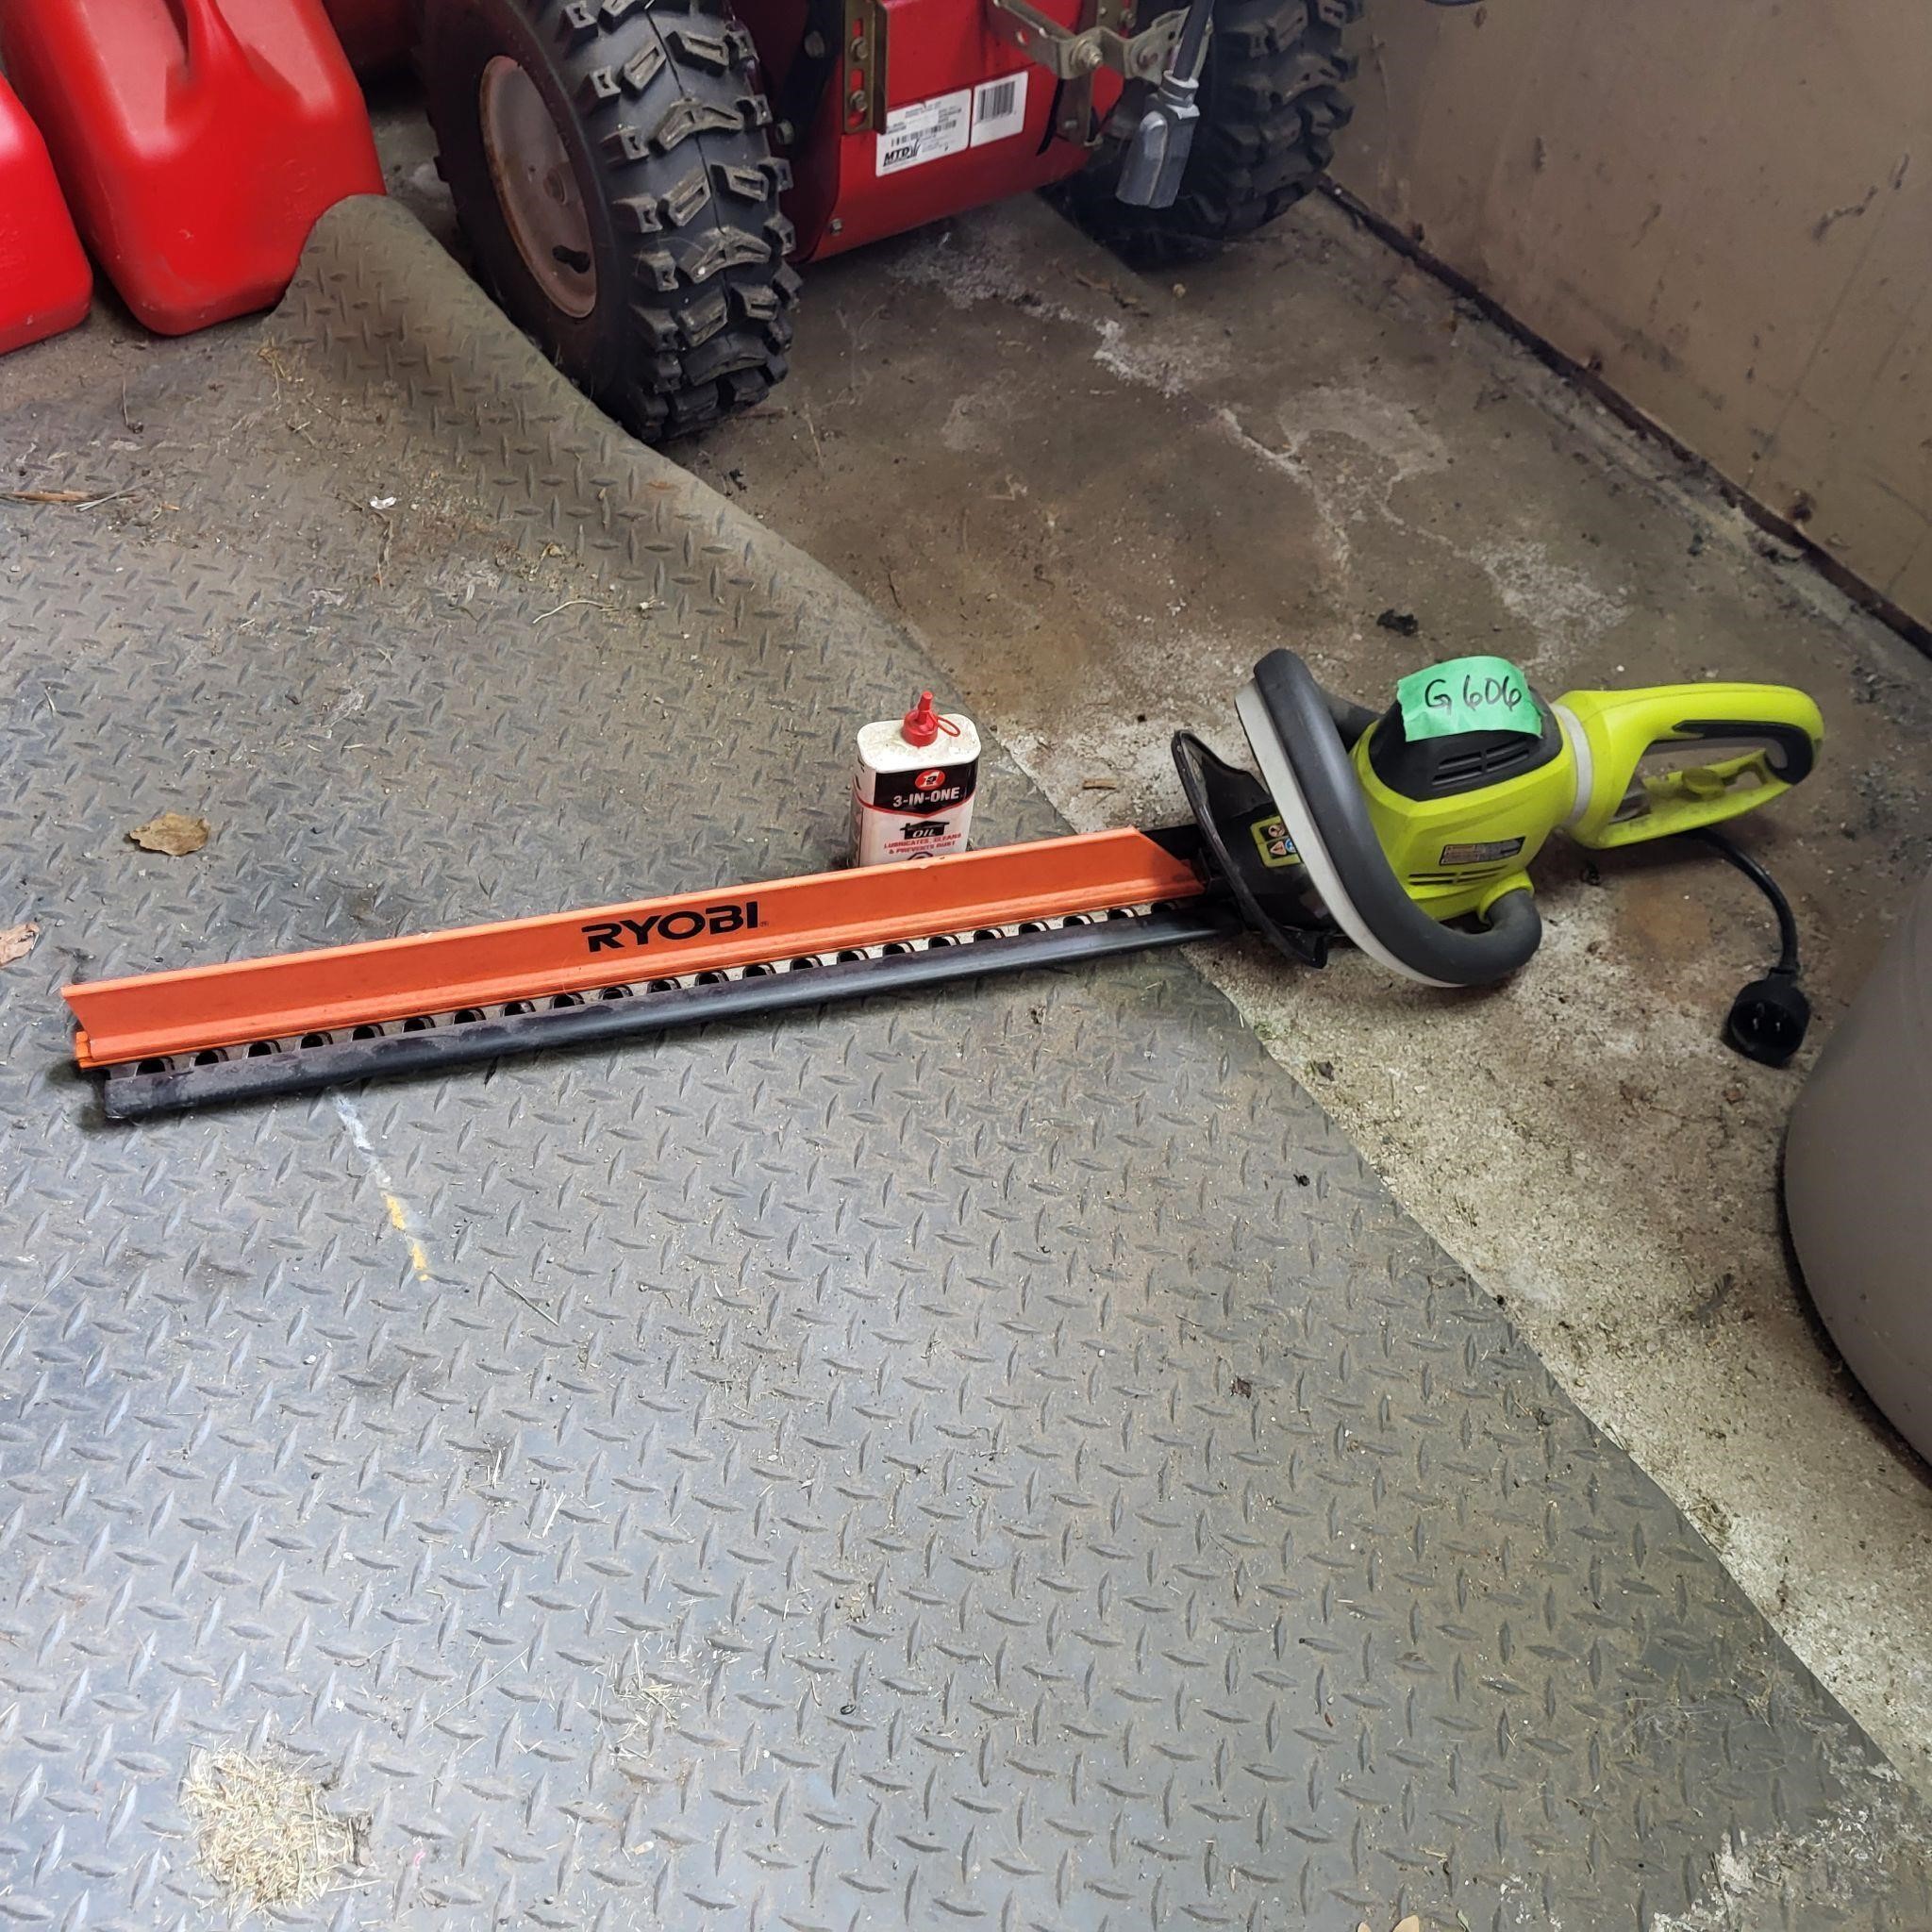 G606 Ryobi Hedge trimmer and oil